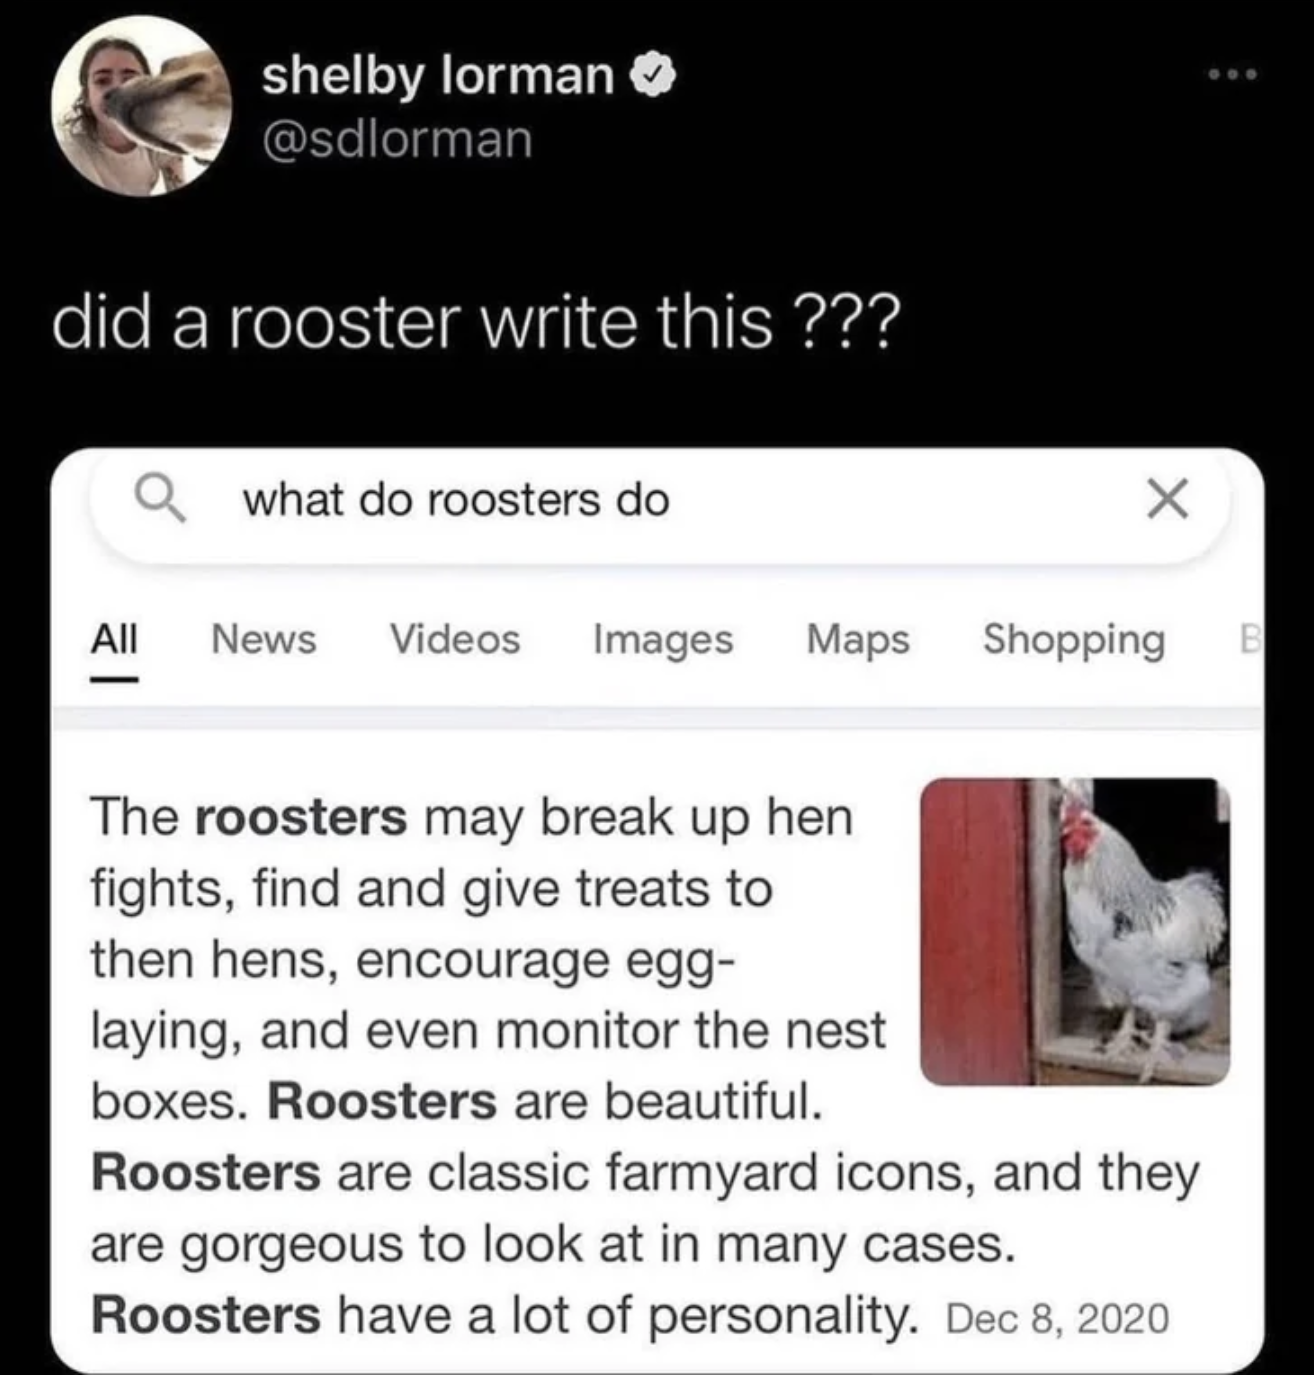 screenshot - shelby lorman did a rooster write this??? what do roosters do All News Videos Images Maps The roosters may break up hen Shopping B fights, find and give treats to then hens, encourage egg laying, and even monitor the nest boxes. Roosters are 